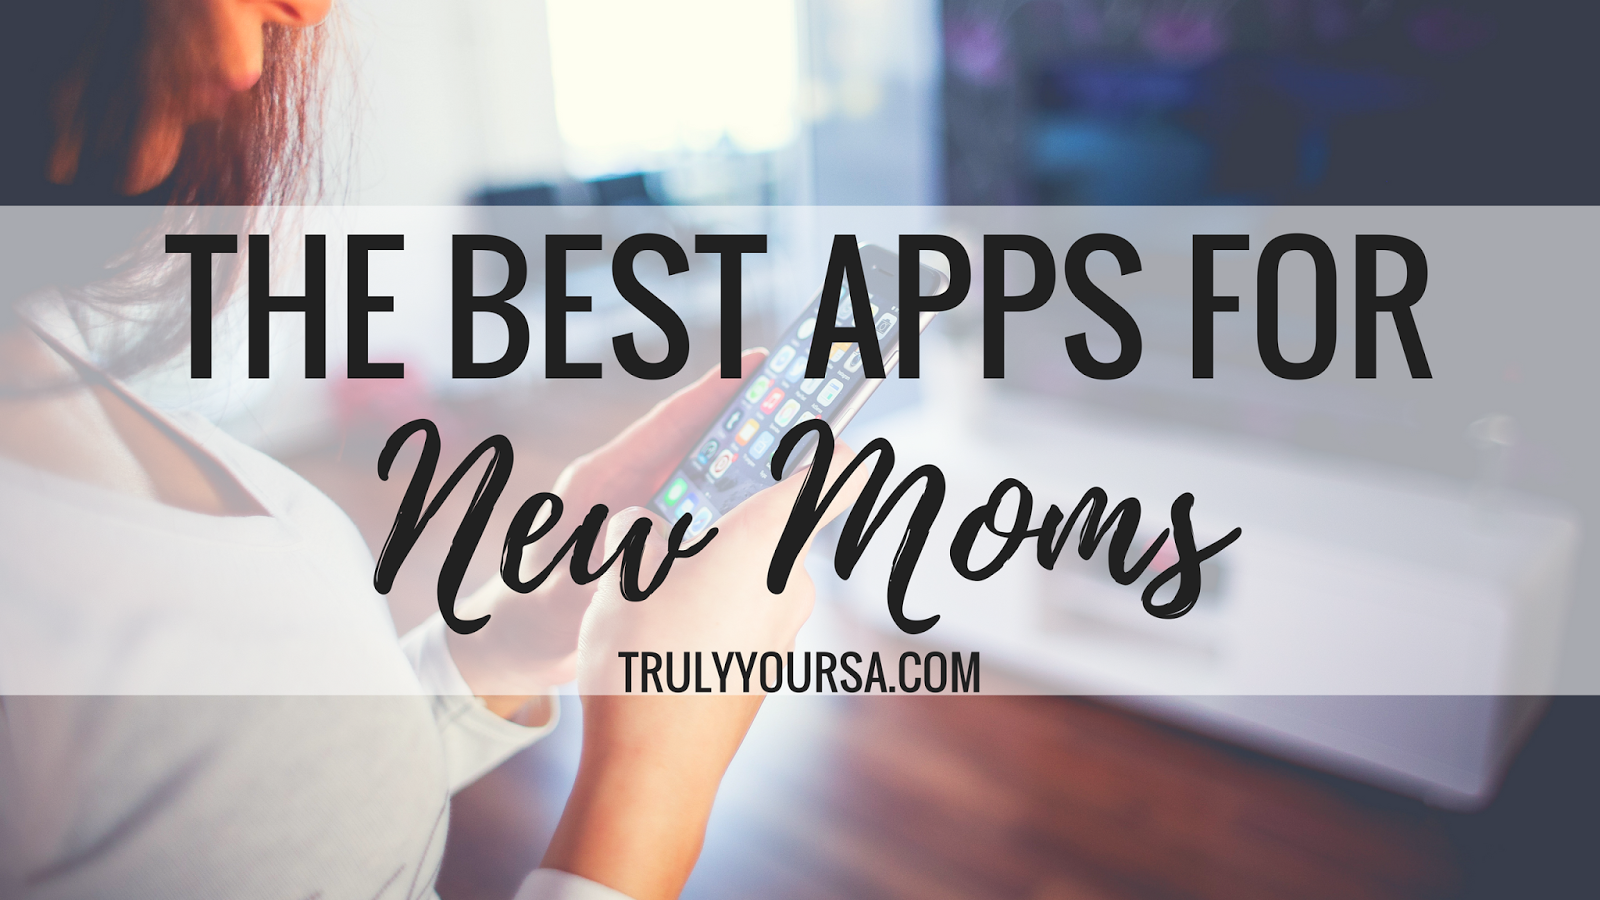 As a millennial, I'm pretty much attached to my phone 24/7. As a millennial parent, I use my phone for everything - taking and sending photos, researching symptoms, and scouring forums for other moms with the same issues. For the past three months I've relied on a few apps that make this motherhood job a little easier. Keep reading for a rundown of my favorite apps for new moms!